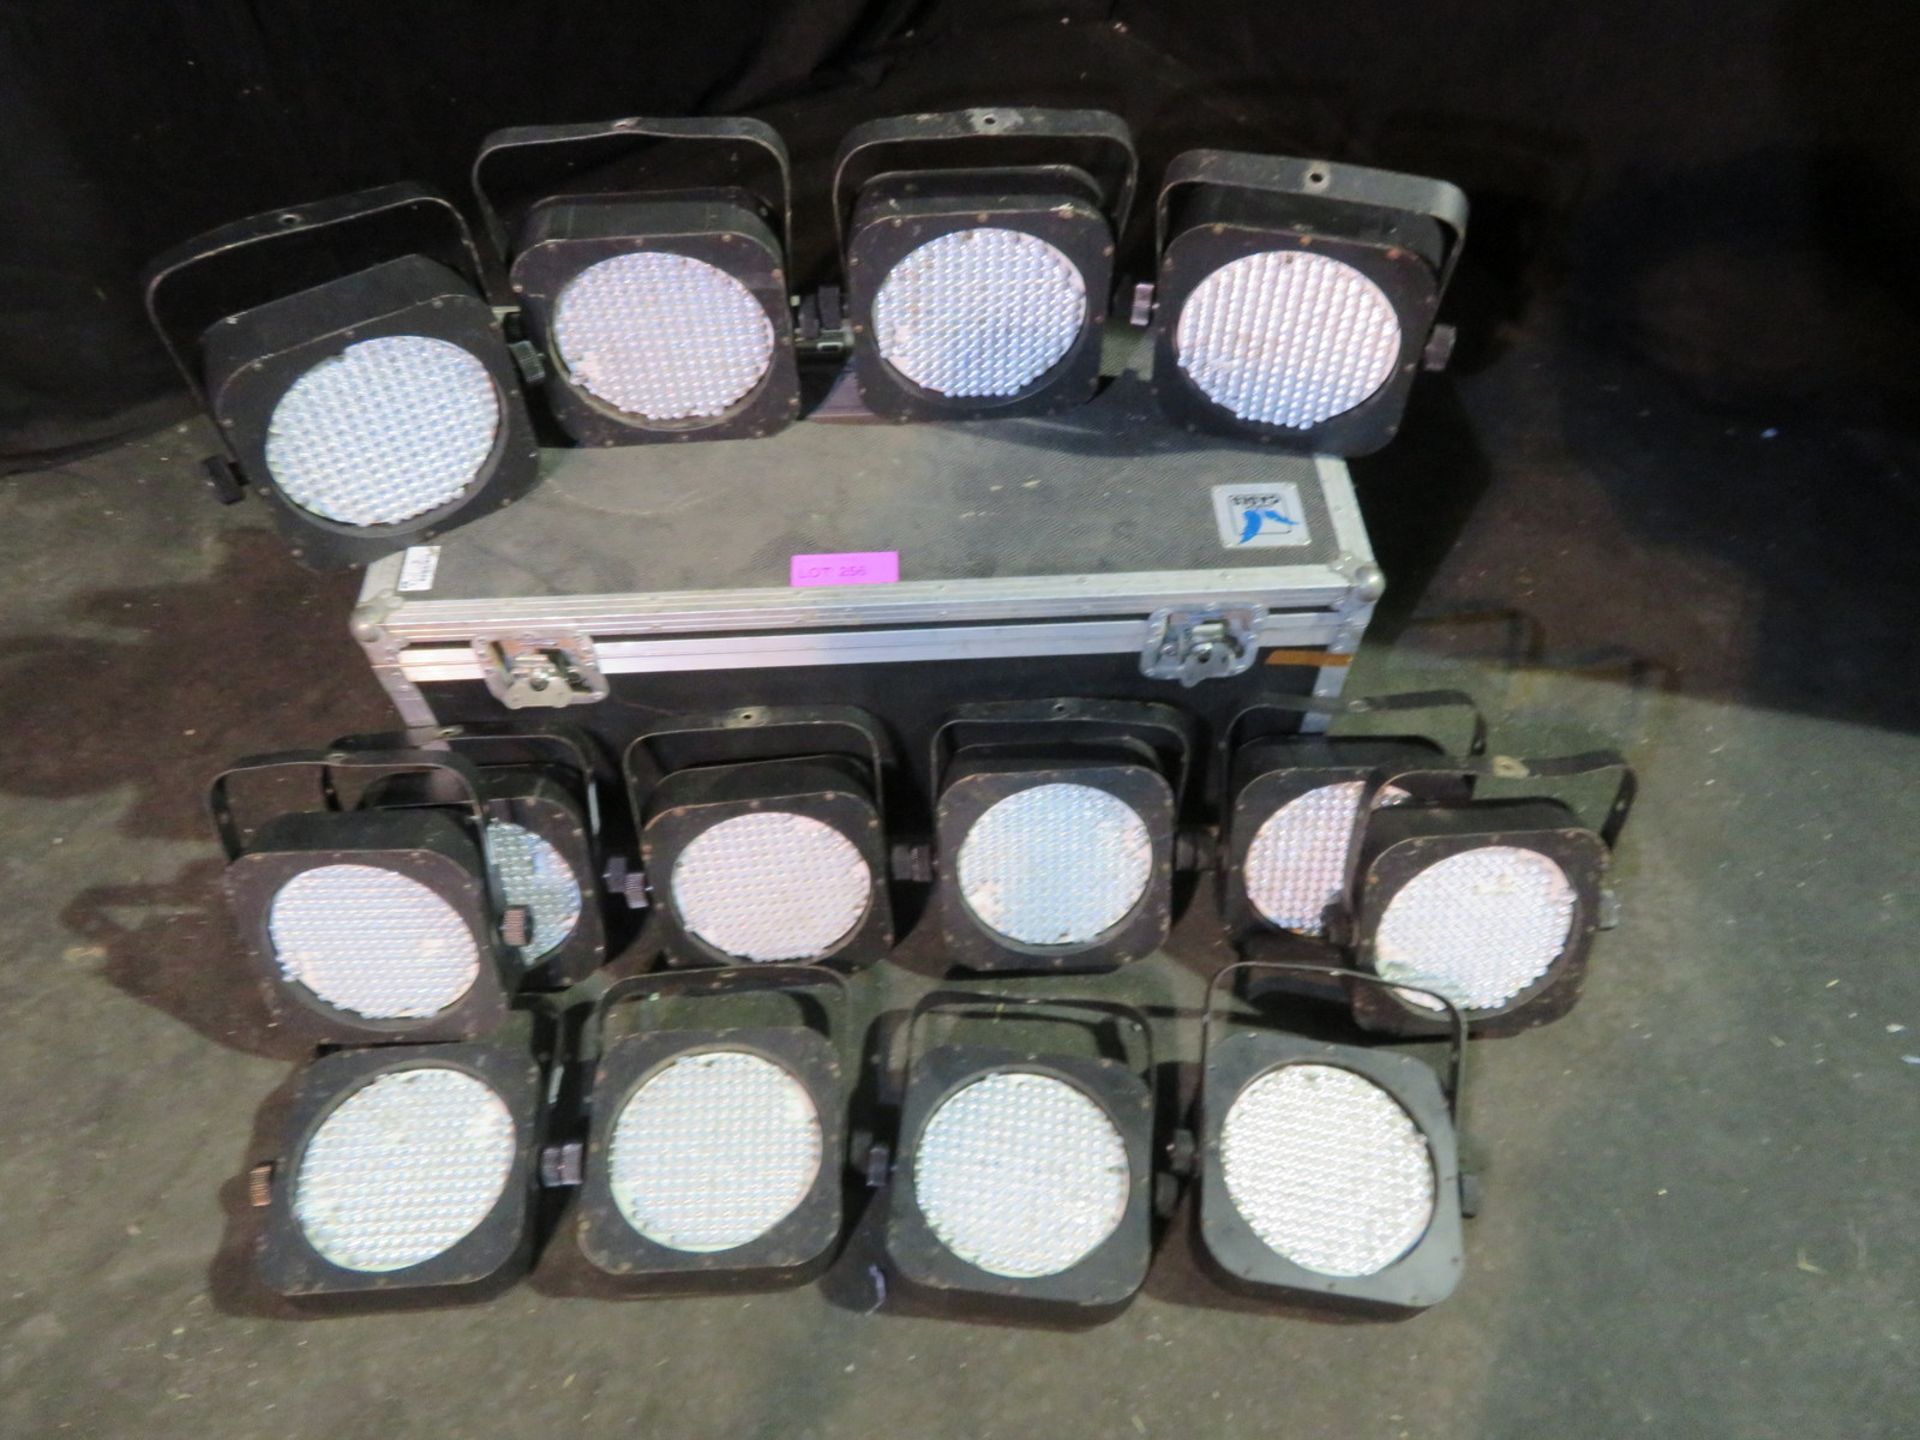 14x LED technologies Zoom flat LED par cans. Some with LEDs missing. Comes in flightcase - Image 2 of 8